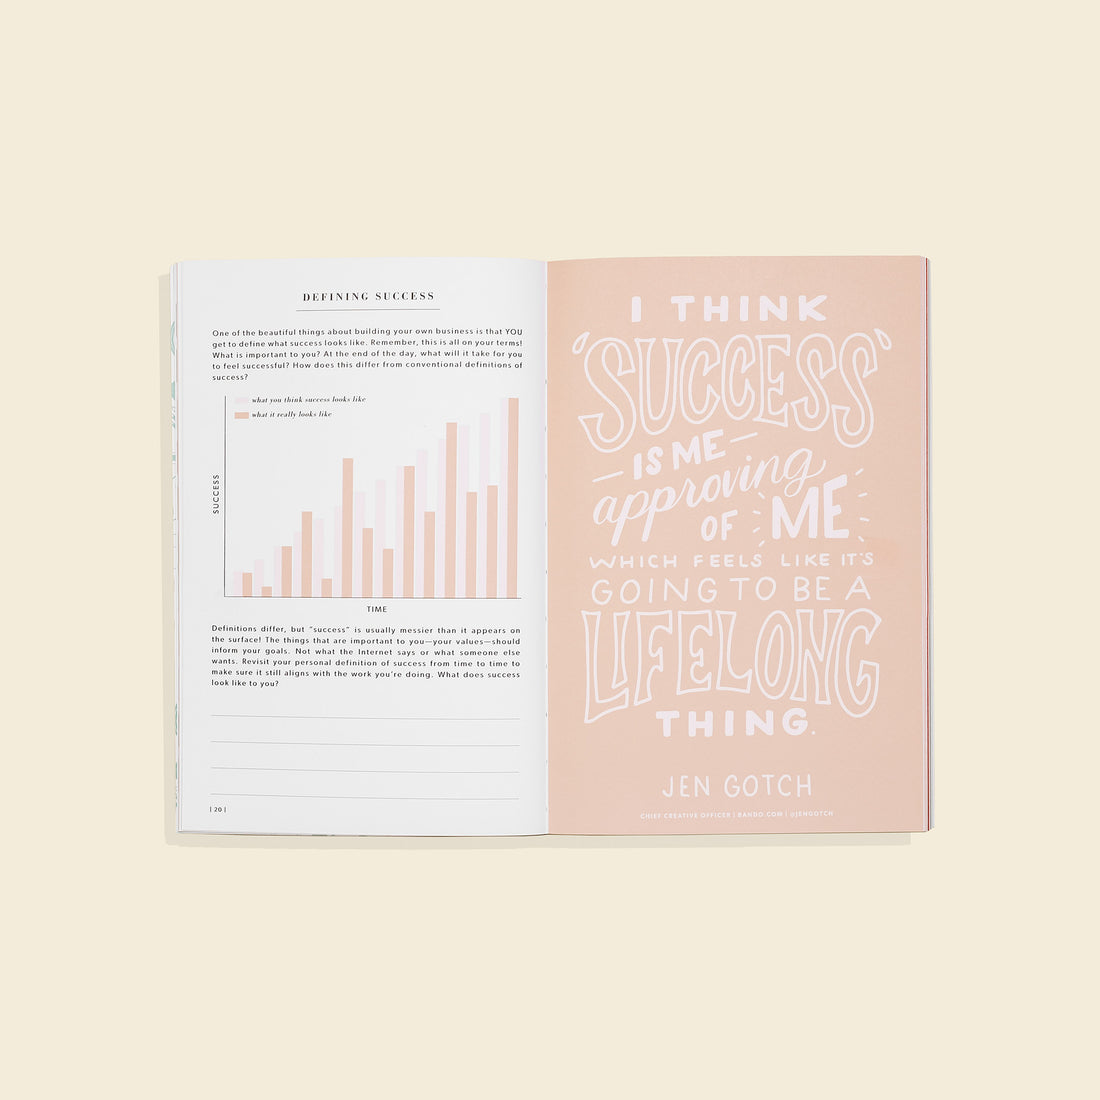 Mind Your Business Creative Workbook by Ilana Griffo